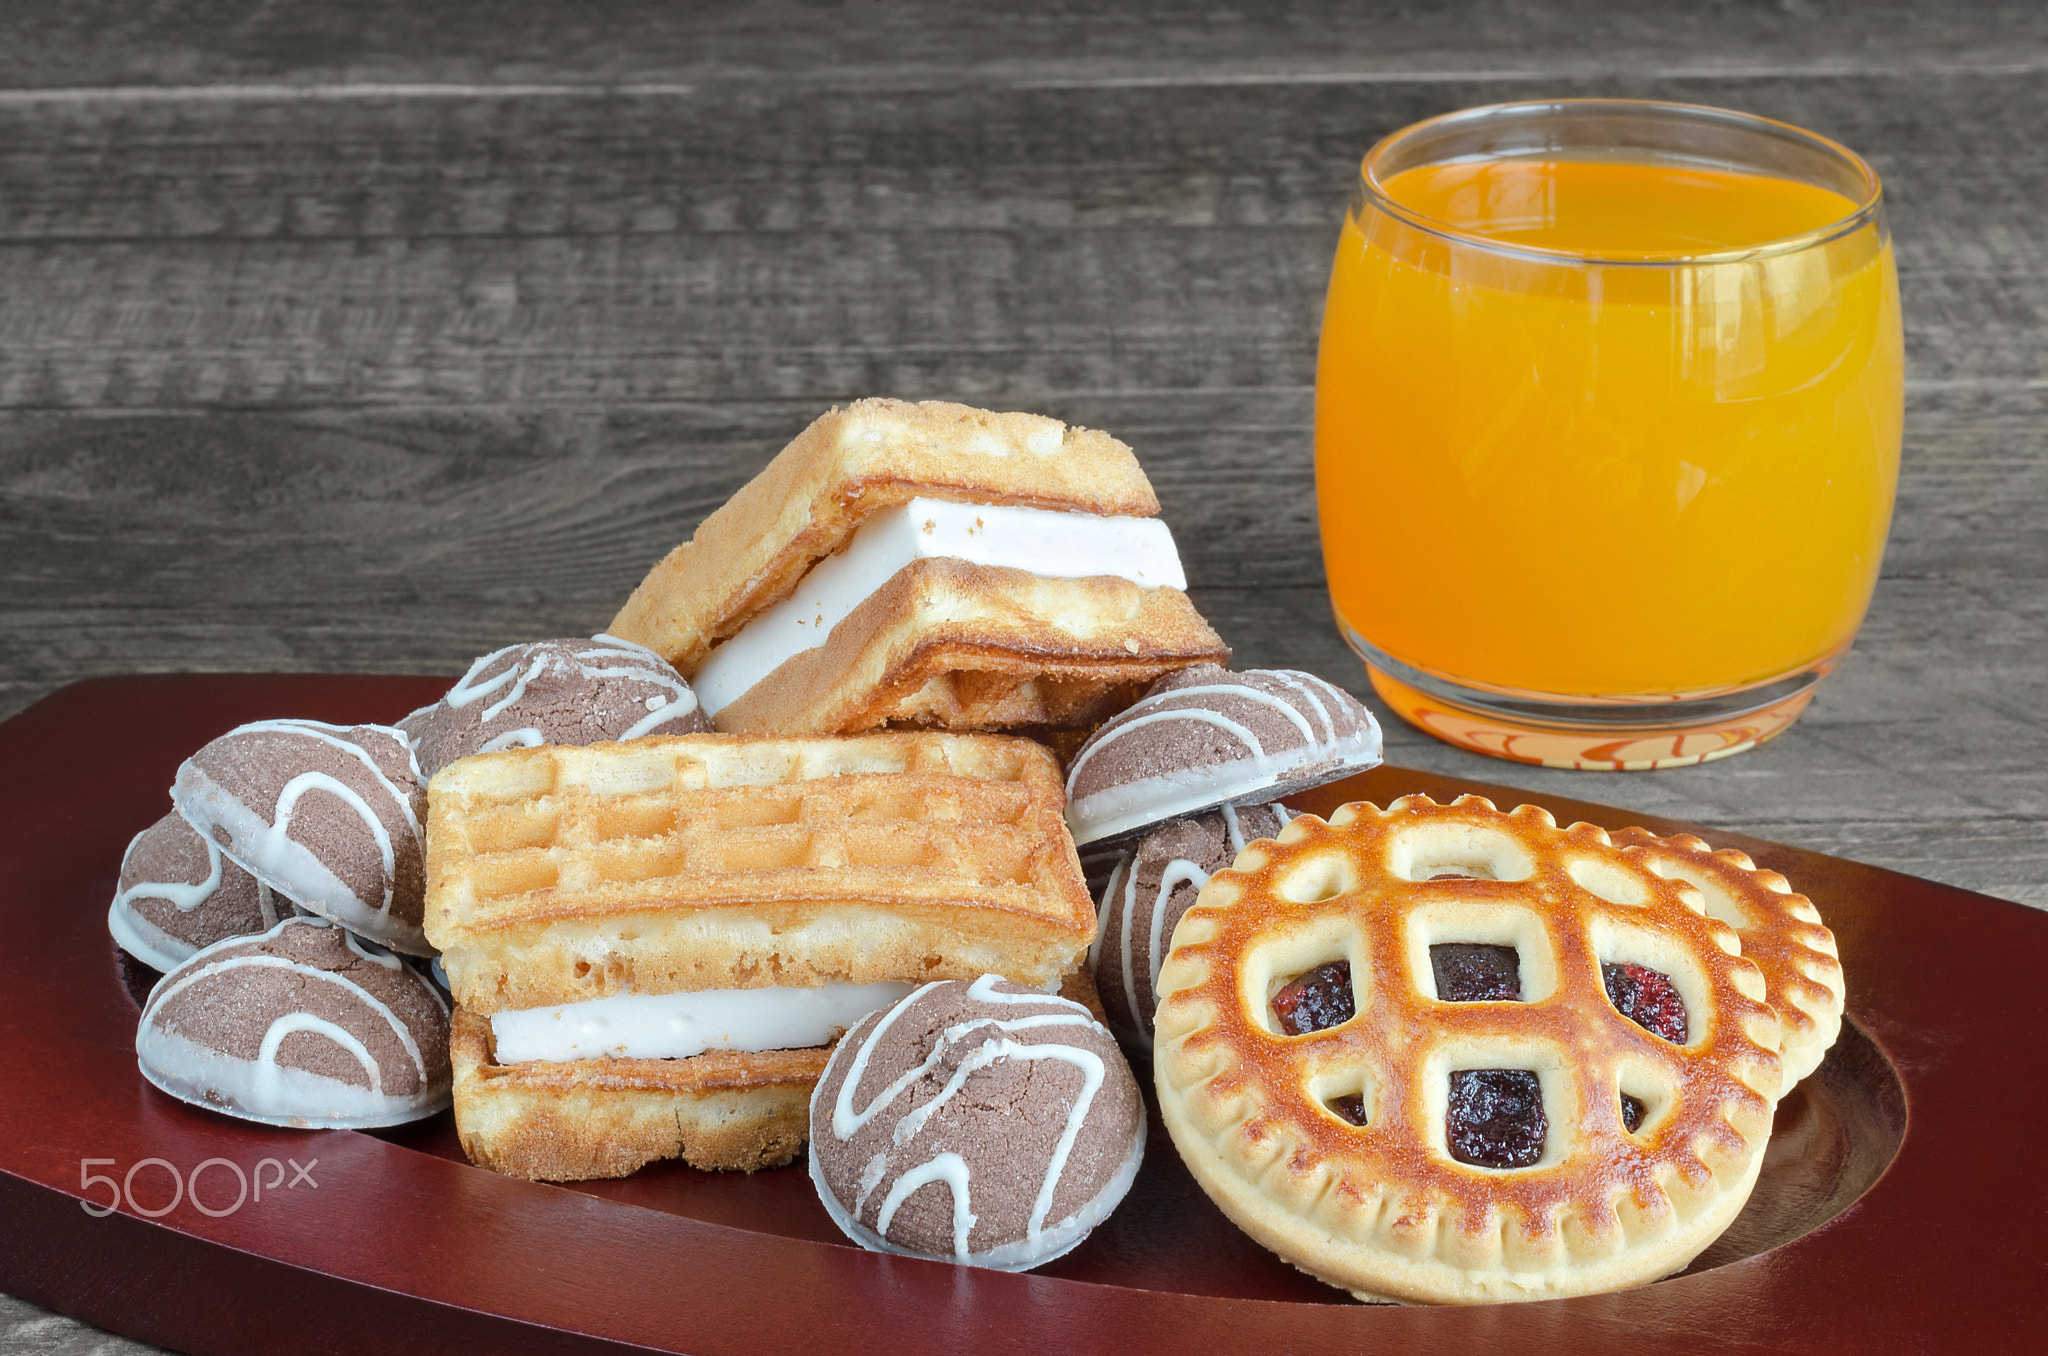 Different cookies and juice on wooden background. Selective focus.